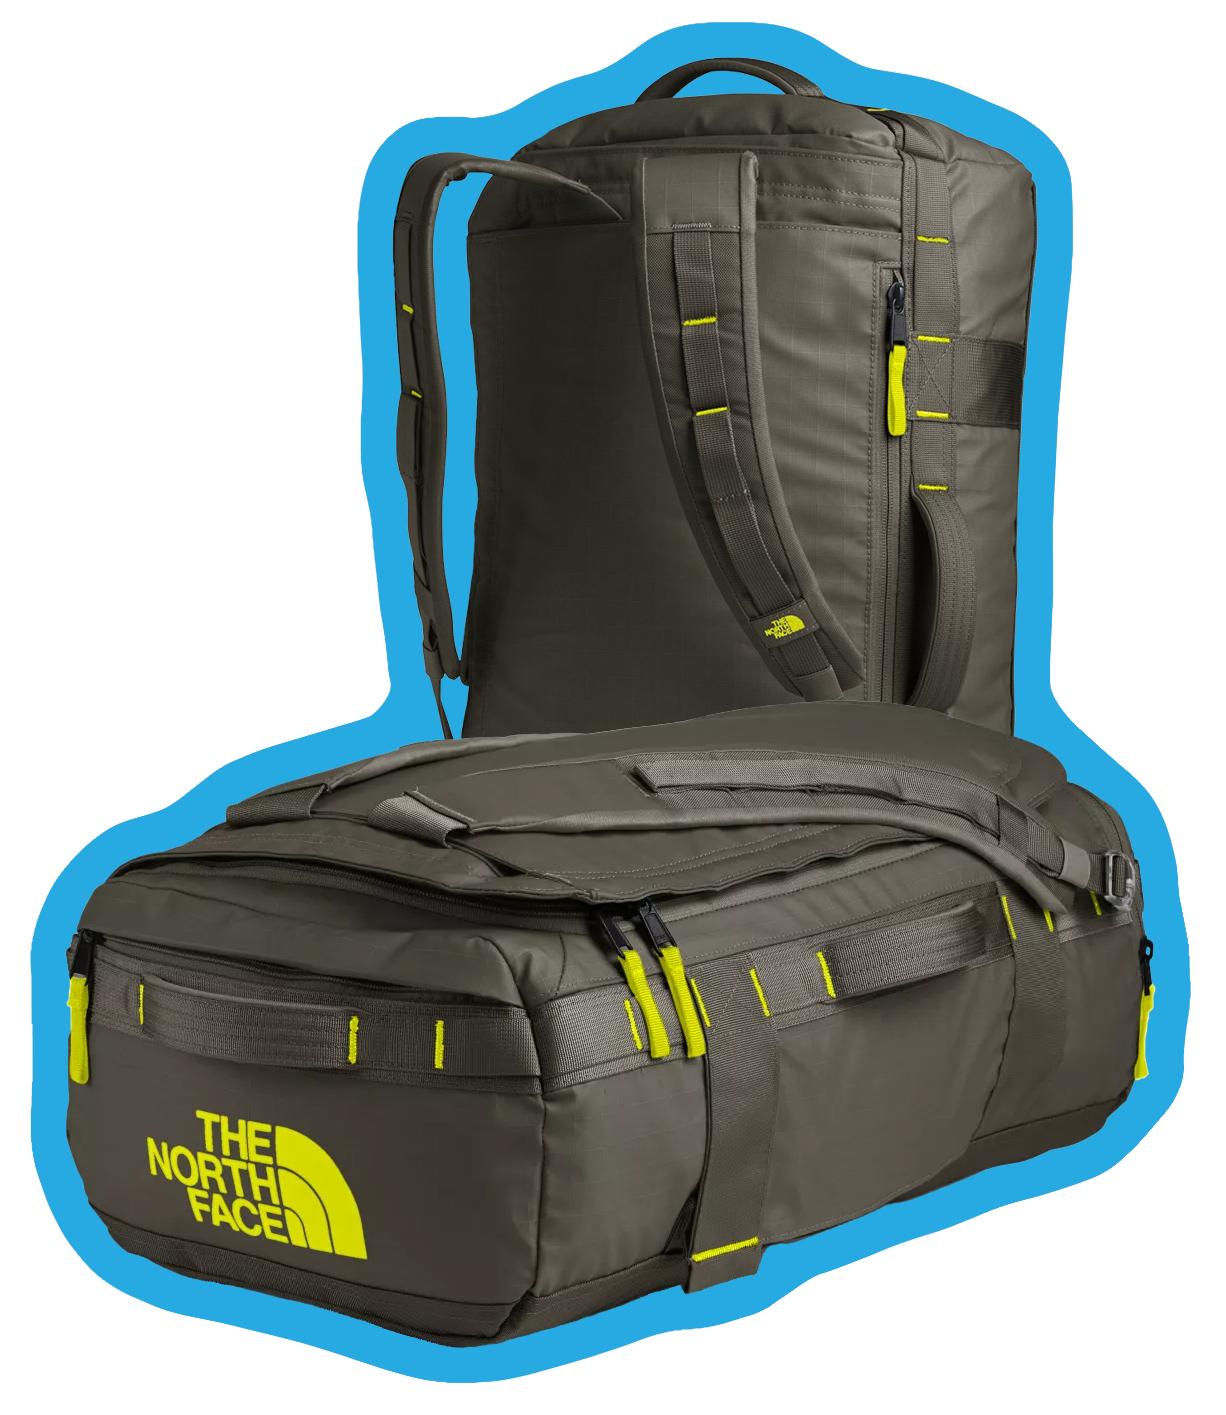 The North Face Basecamp Voyager Duffle Bag - Visiom Marketing sales incentive